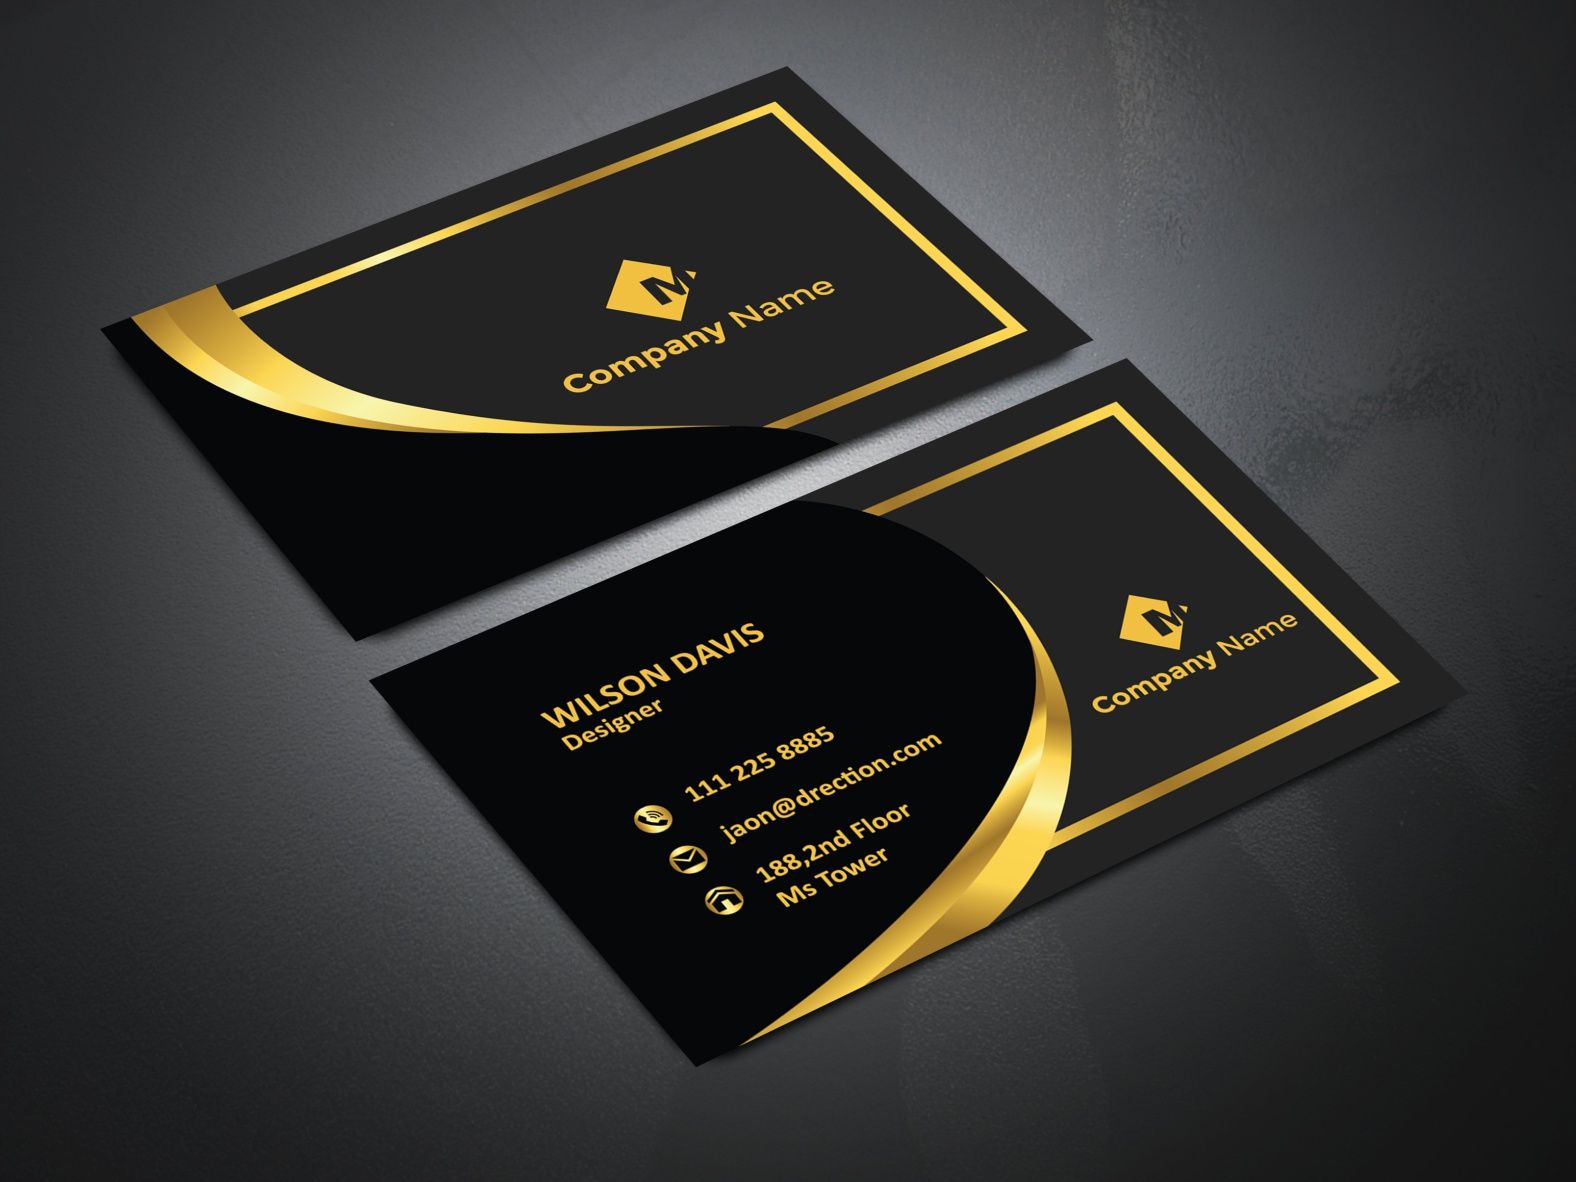 How to Create a Cohesive Brand Identity Through Your Business Cards